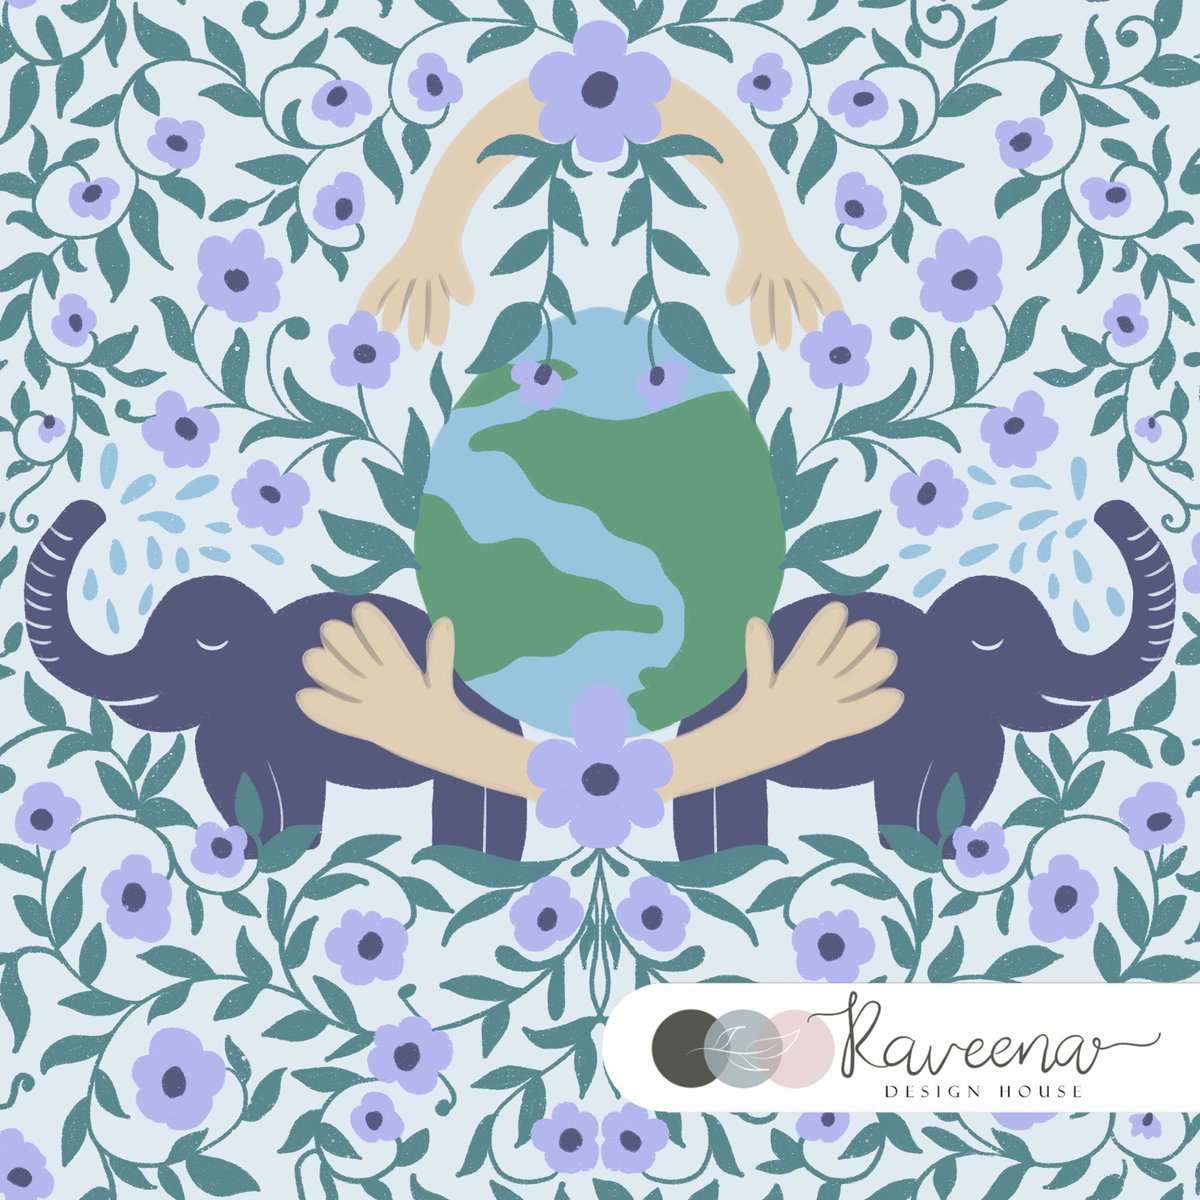 #protectenvironment #protectearth #saveearth #environmentday #earthday #repeatpattern #printdesign #spoonflower